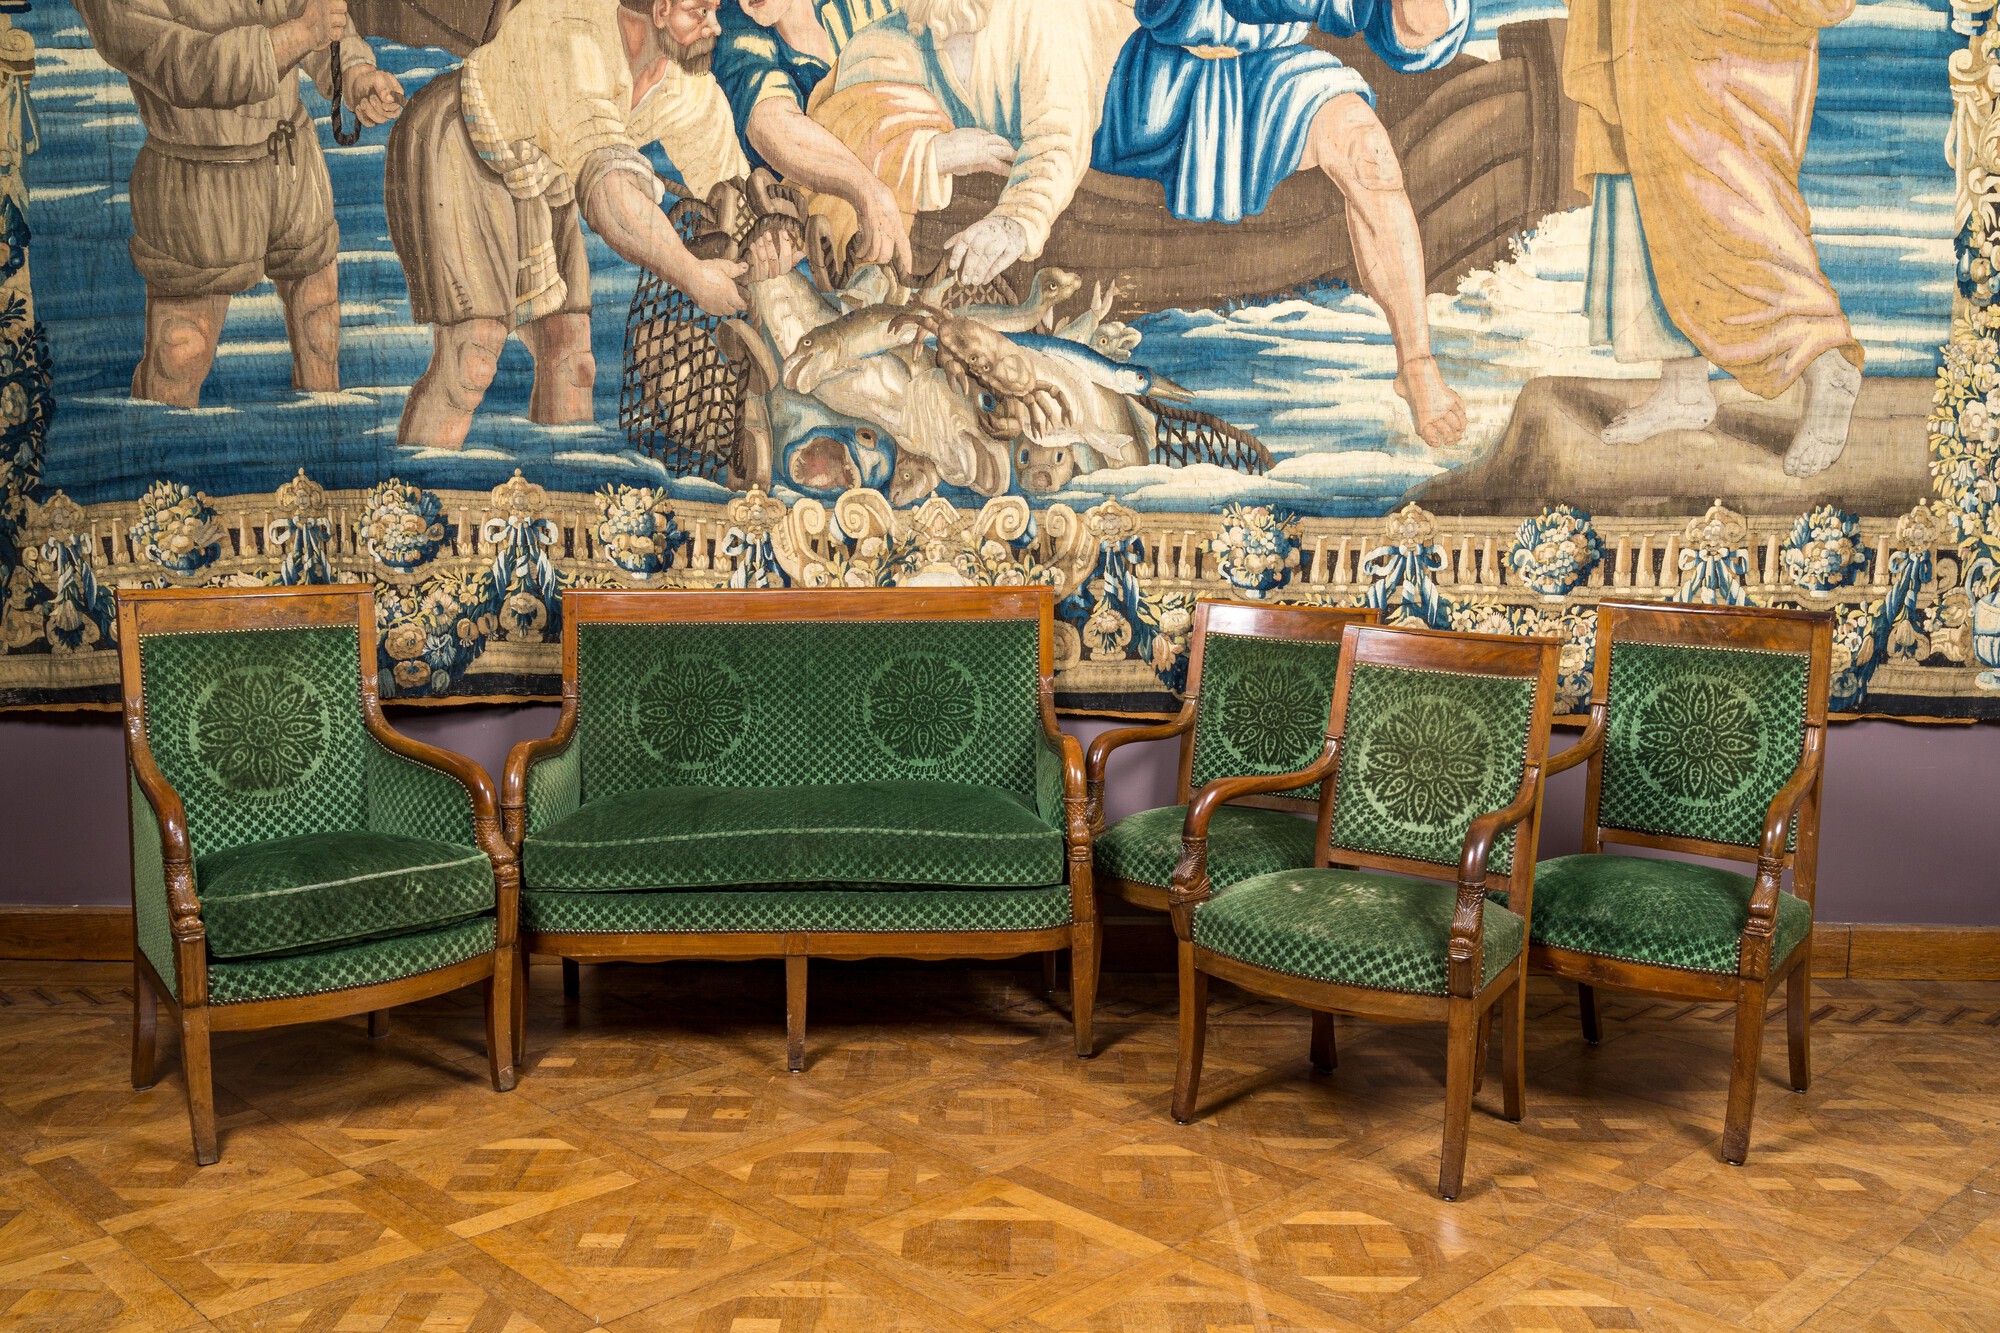 A green-upholstered carved wooden salon set with a two-seater, a fauteuil and three armchairs, 19th